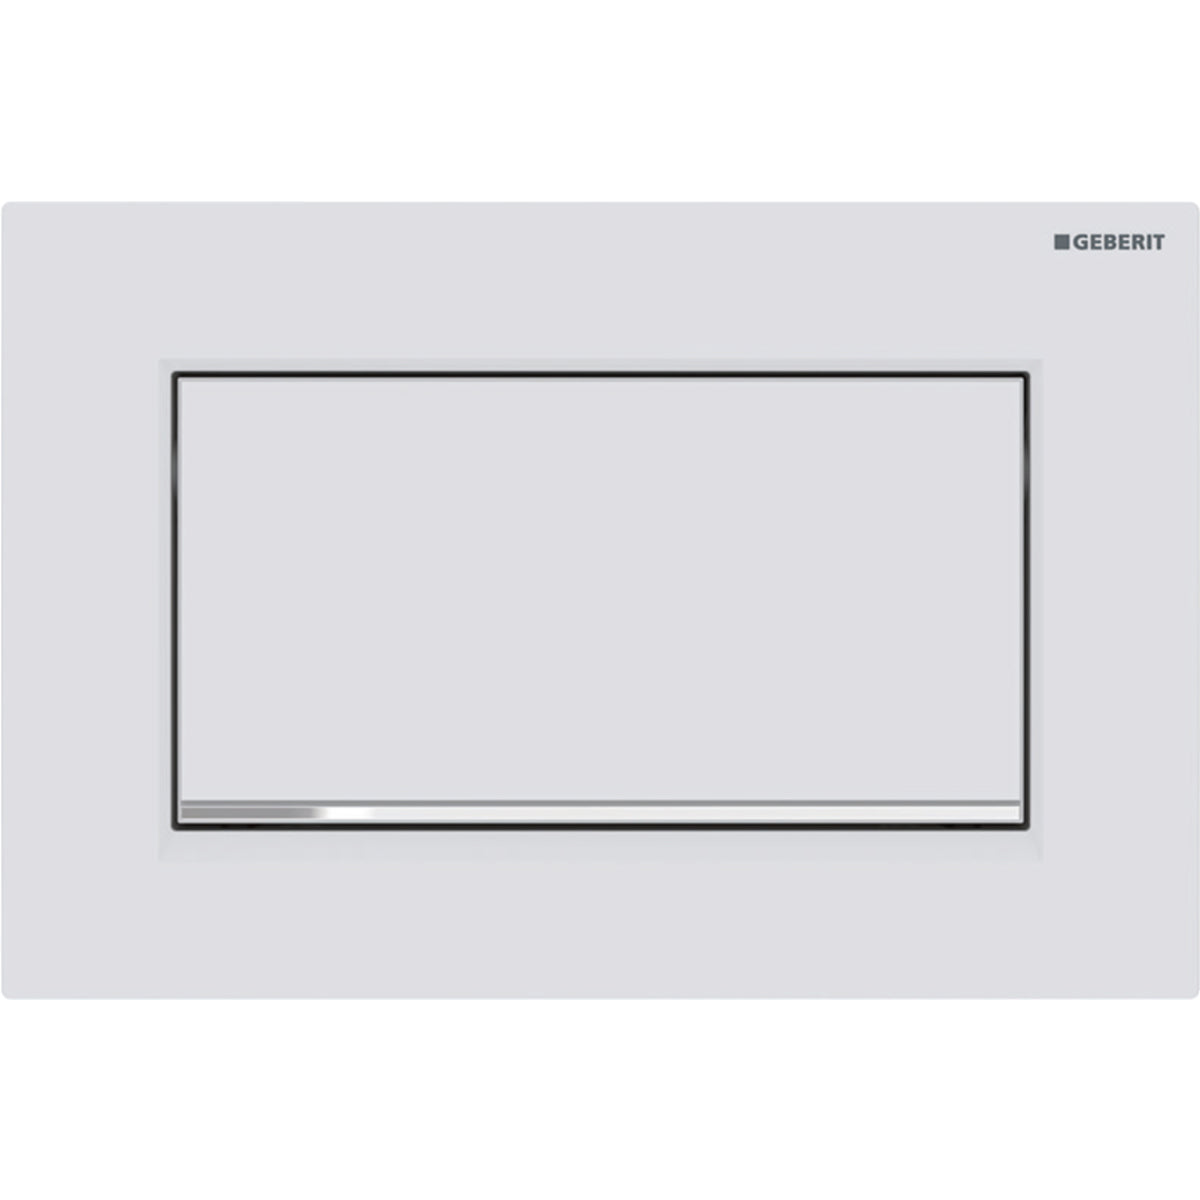 Geberit 115.893.JT.1- Geberit actuator plate Sigma30 for stop-and-go flush, screwable: white matt coated, easy-to-clean coated, bright chrome-plated - FaucetExpress.ca